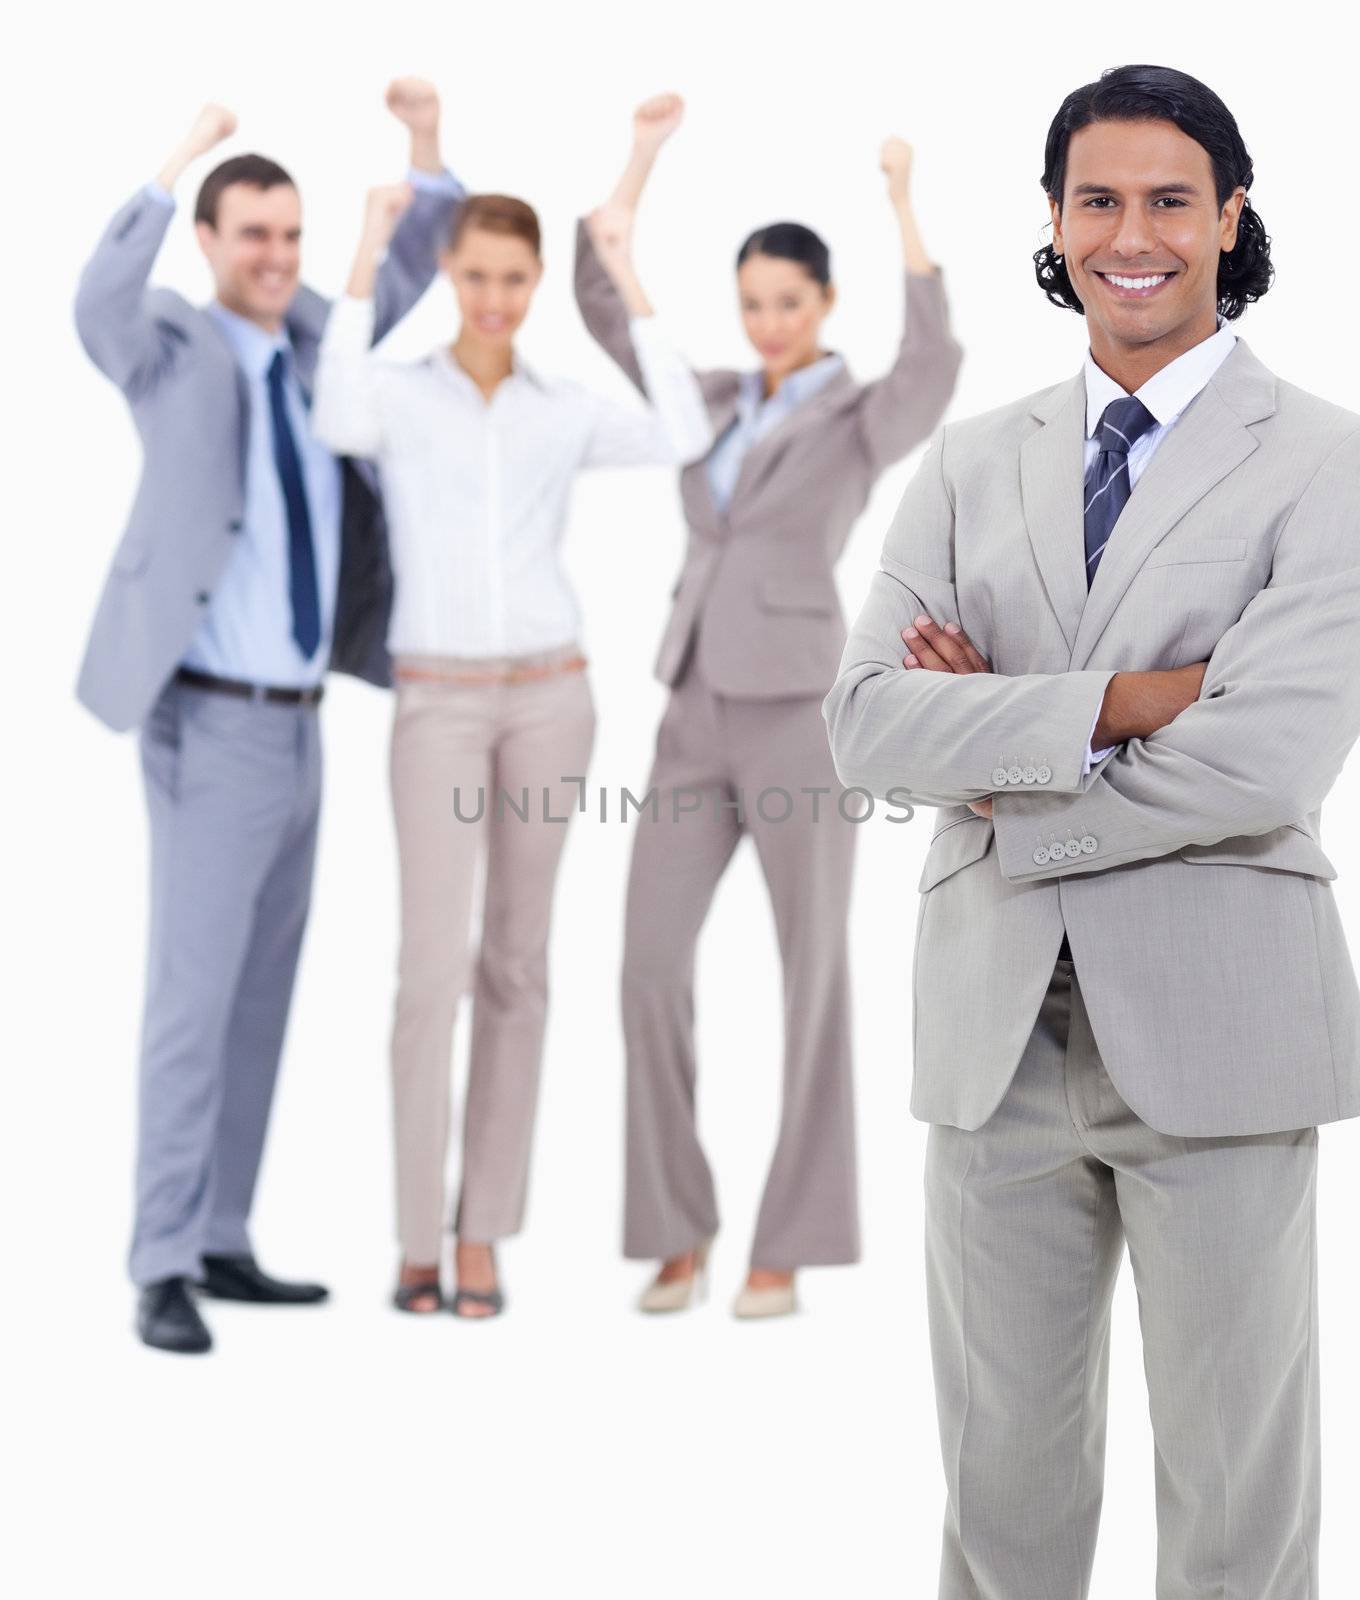 Small close-up of a businessman smiling and crossing his arms with enthusiastic people behind him against white background